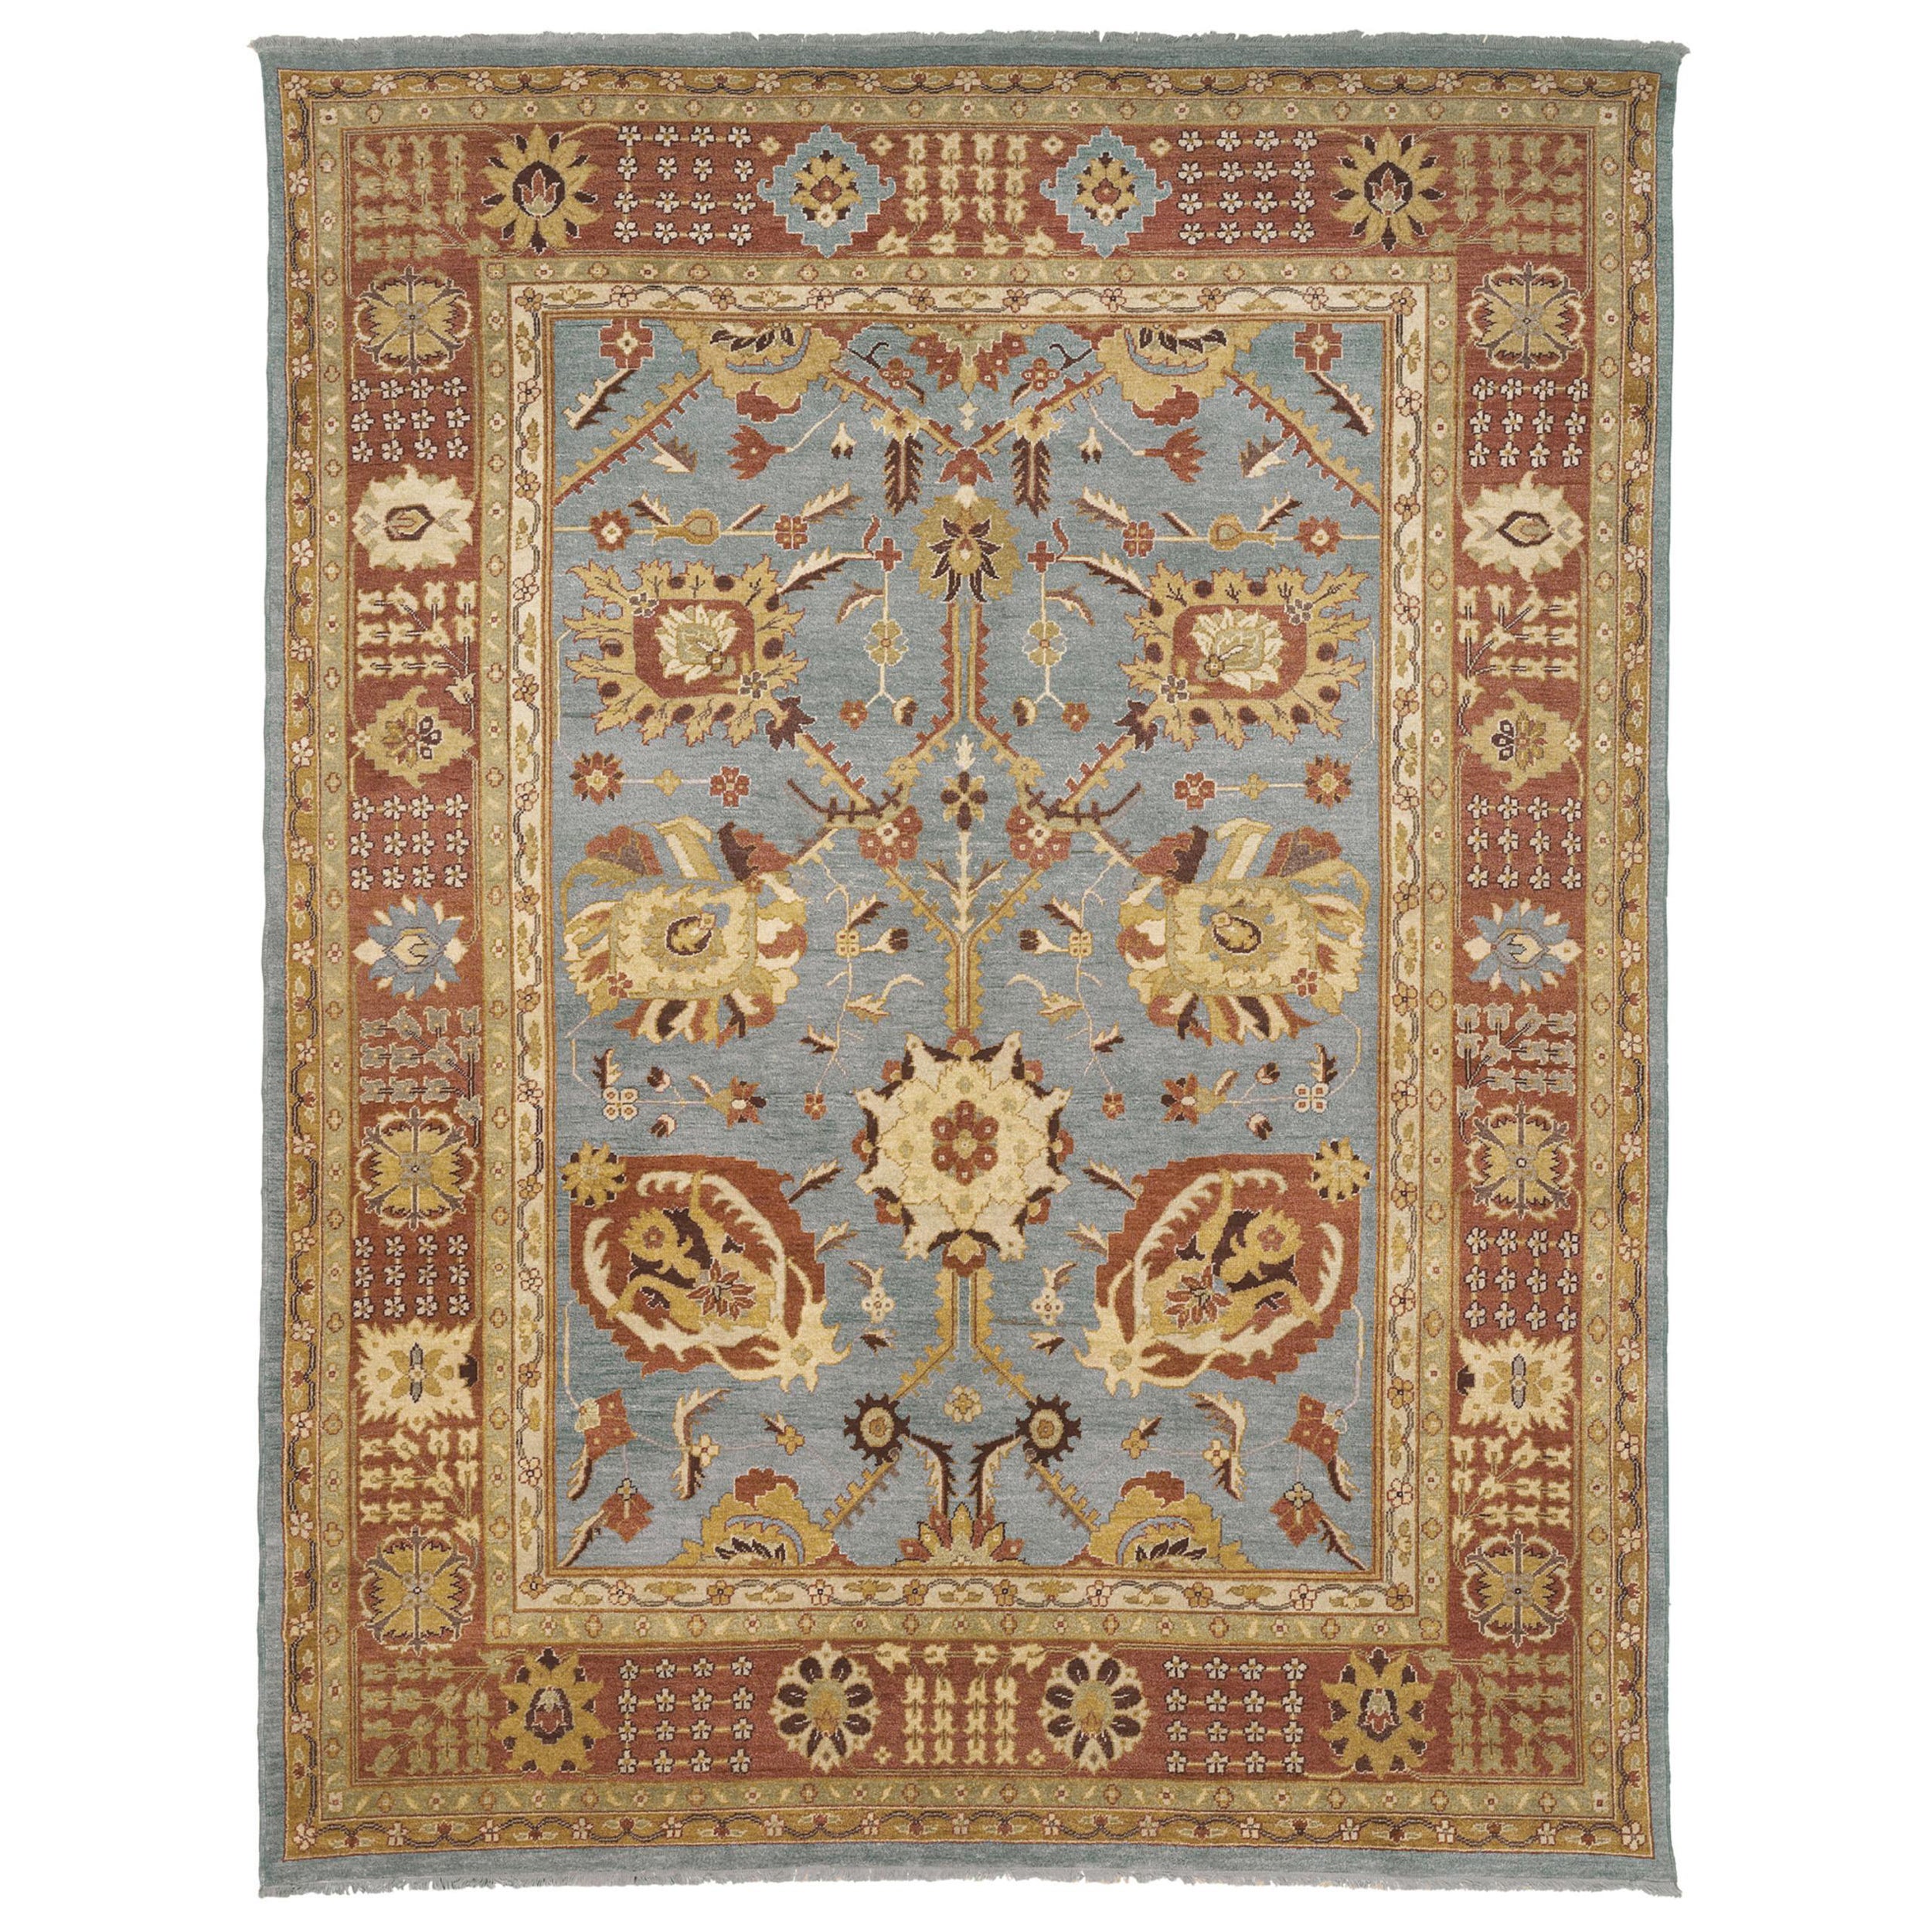 Luxury Traditional Hand-Knotted Tabriz Grey and Amber 14x26 Rug